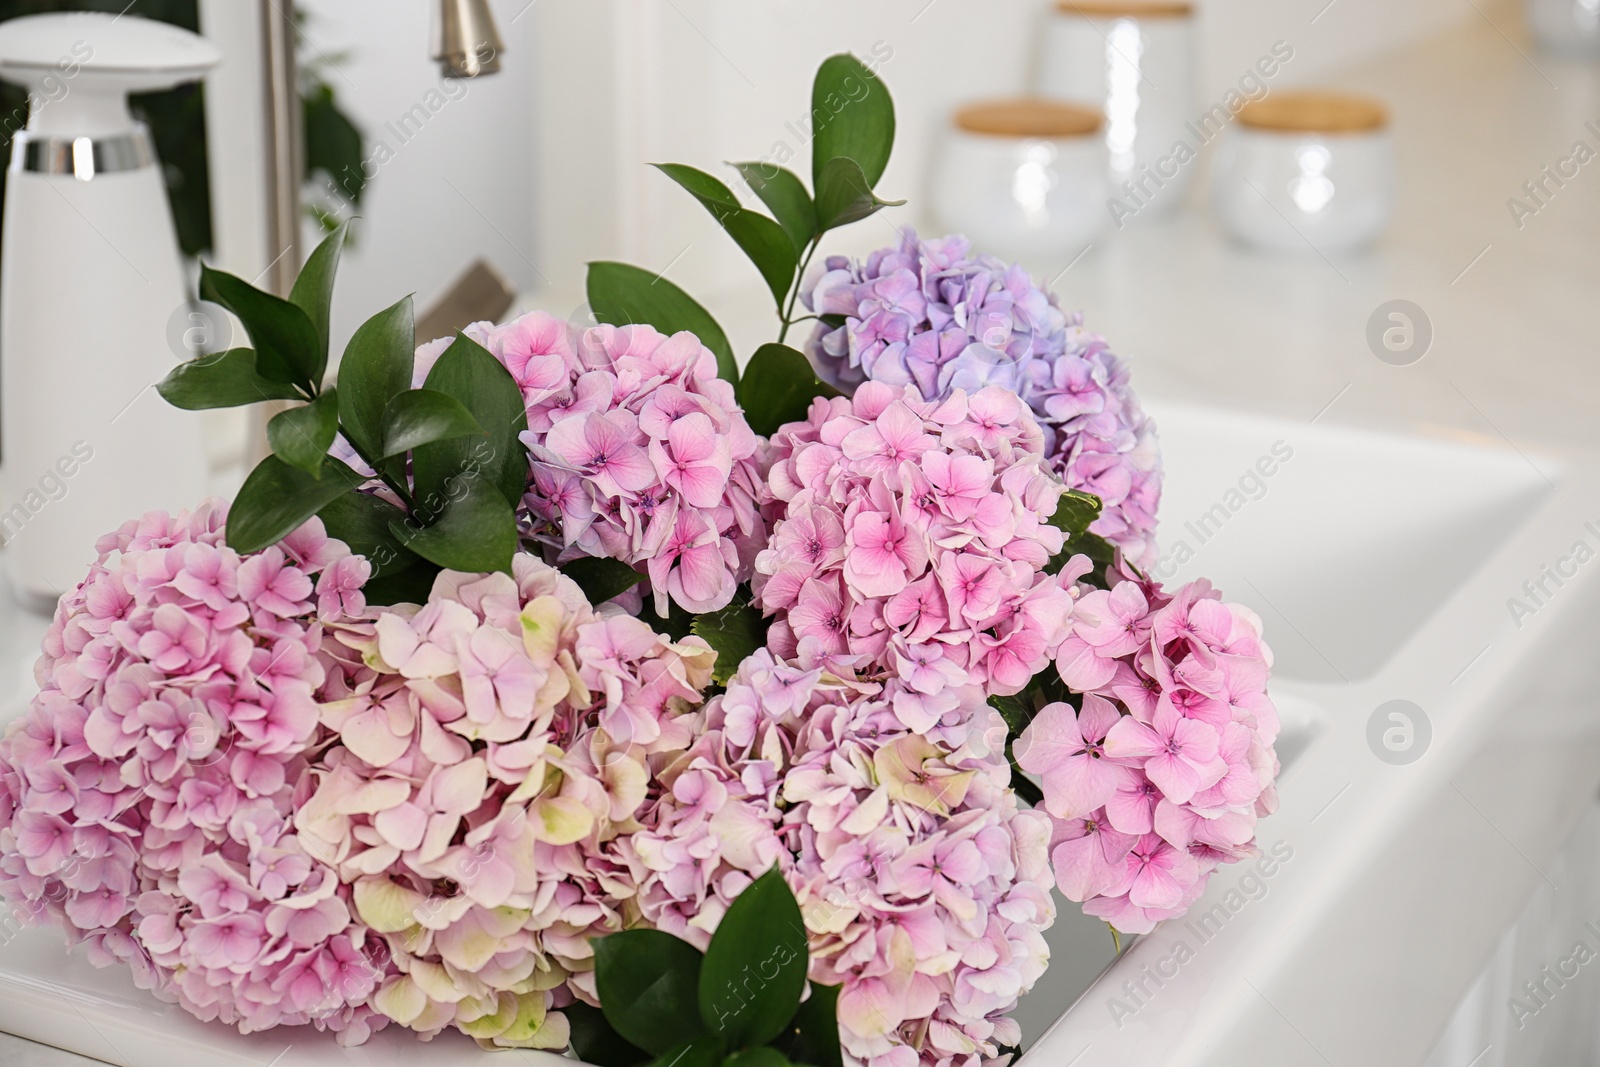 Photo of Bouquet with beautiful hydrangea flowers bouquet in sink, closeup